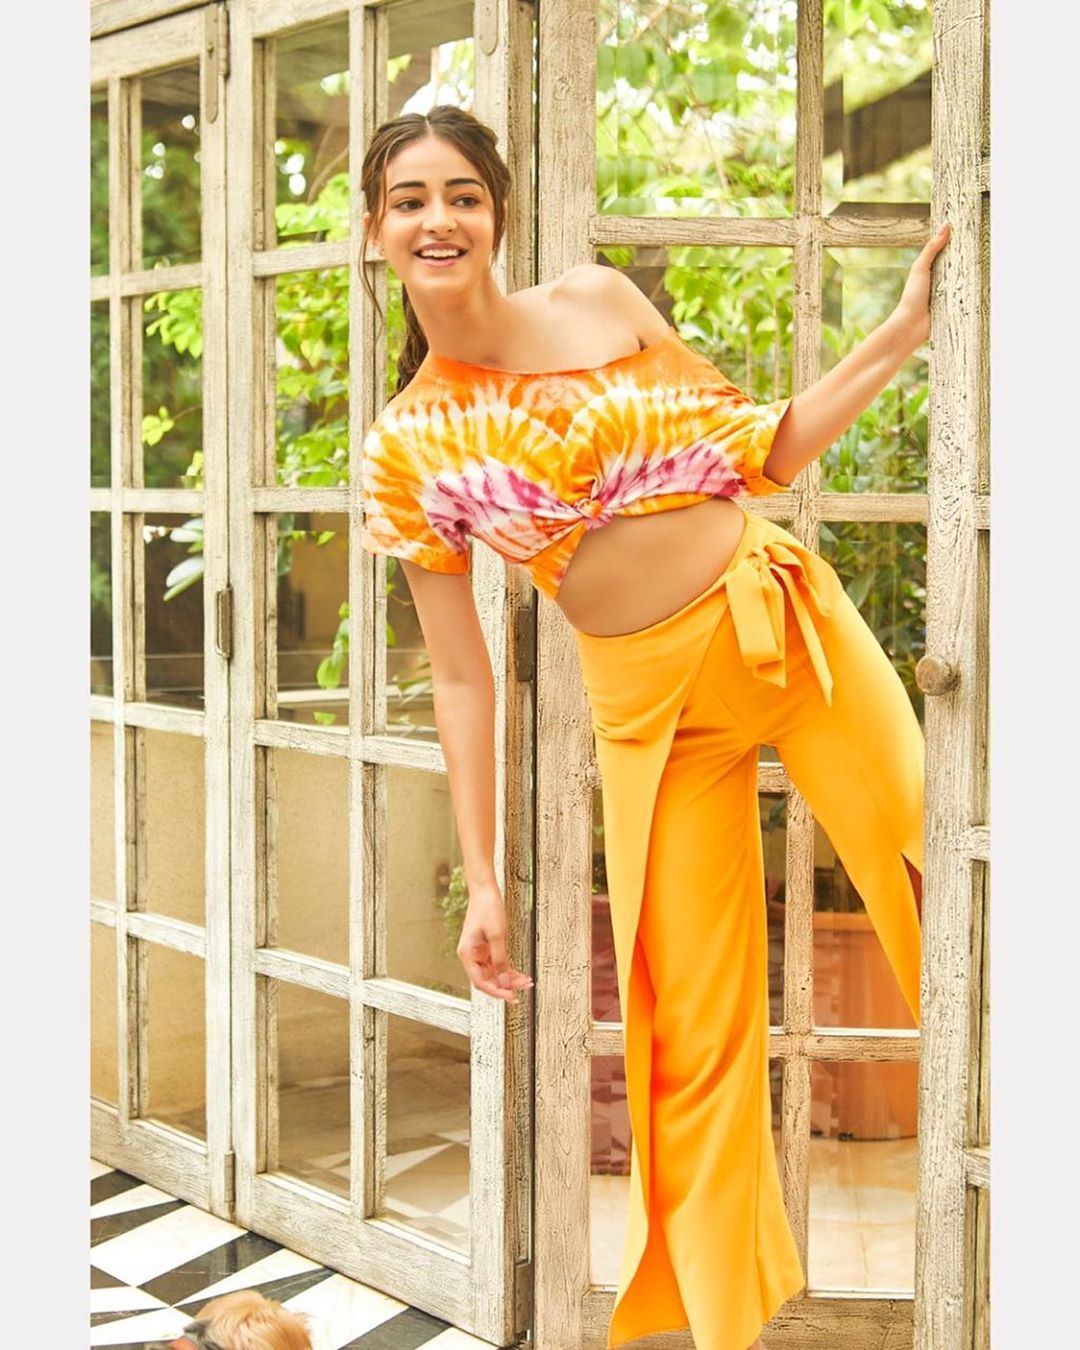 Ananya Pandey Enjoys Yet Another Good Weekend With Pati Patni Aur Woh After Student Of The Year 2 